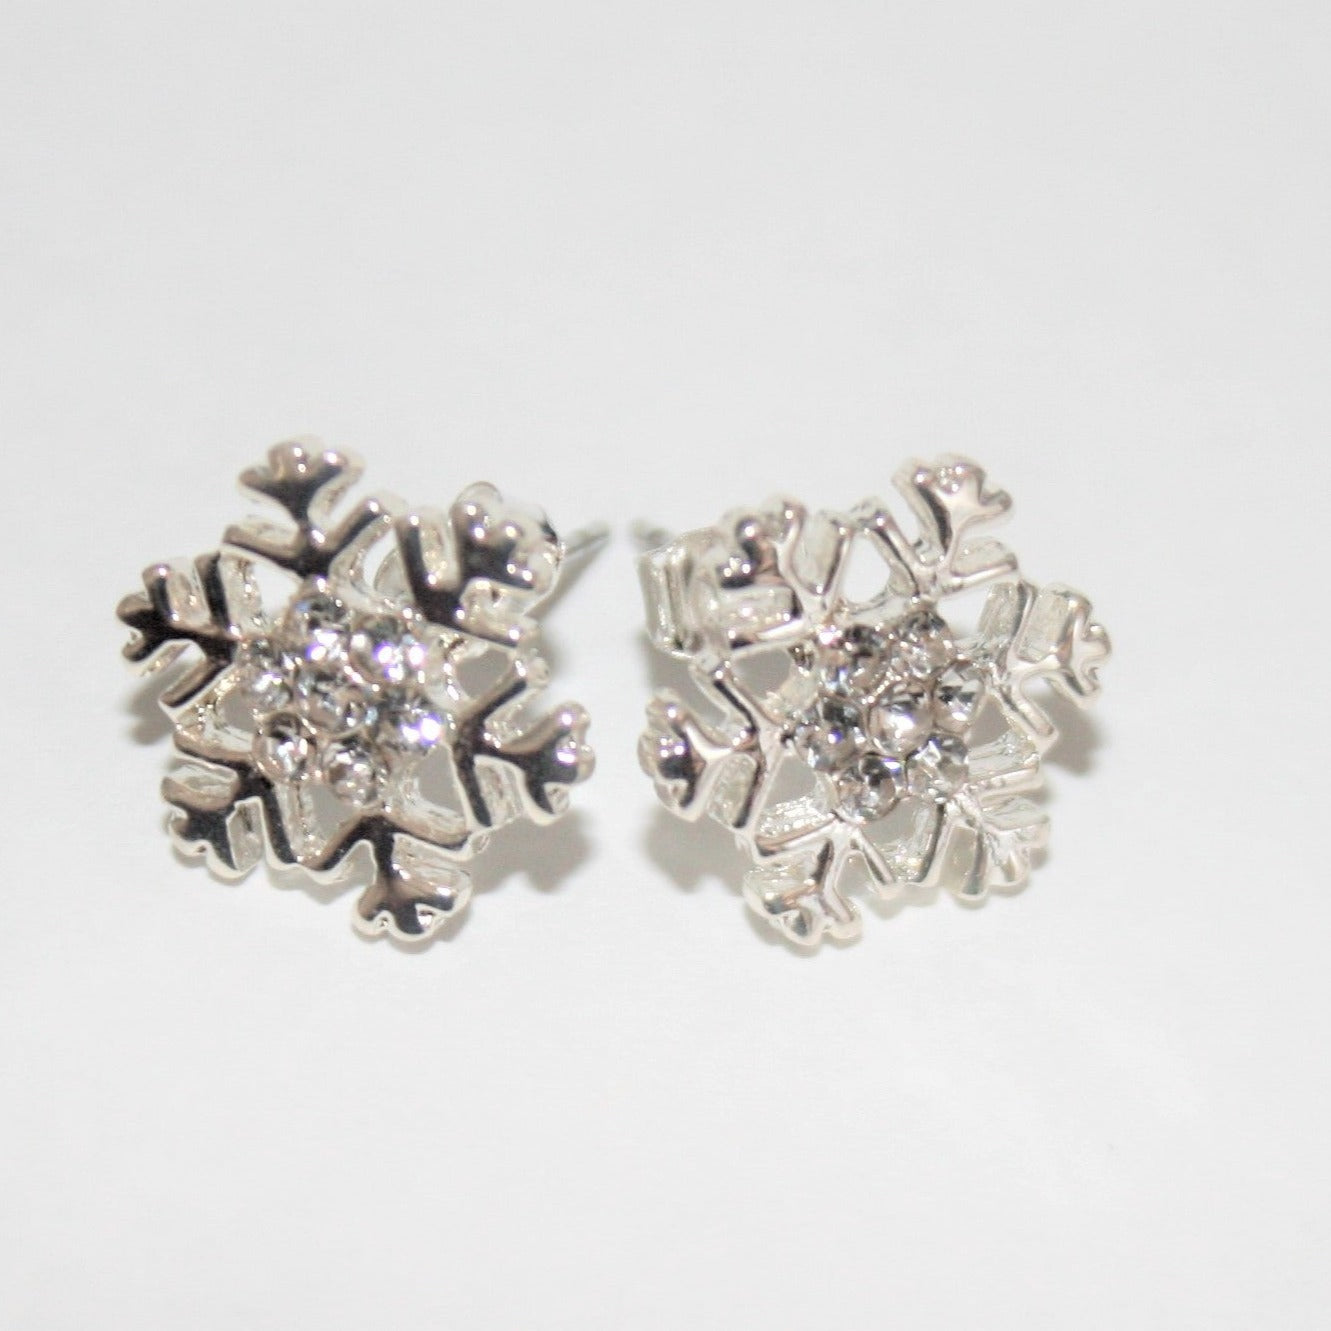 Small Snowflake Earrings w/-stones - SE443 - pack of 5